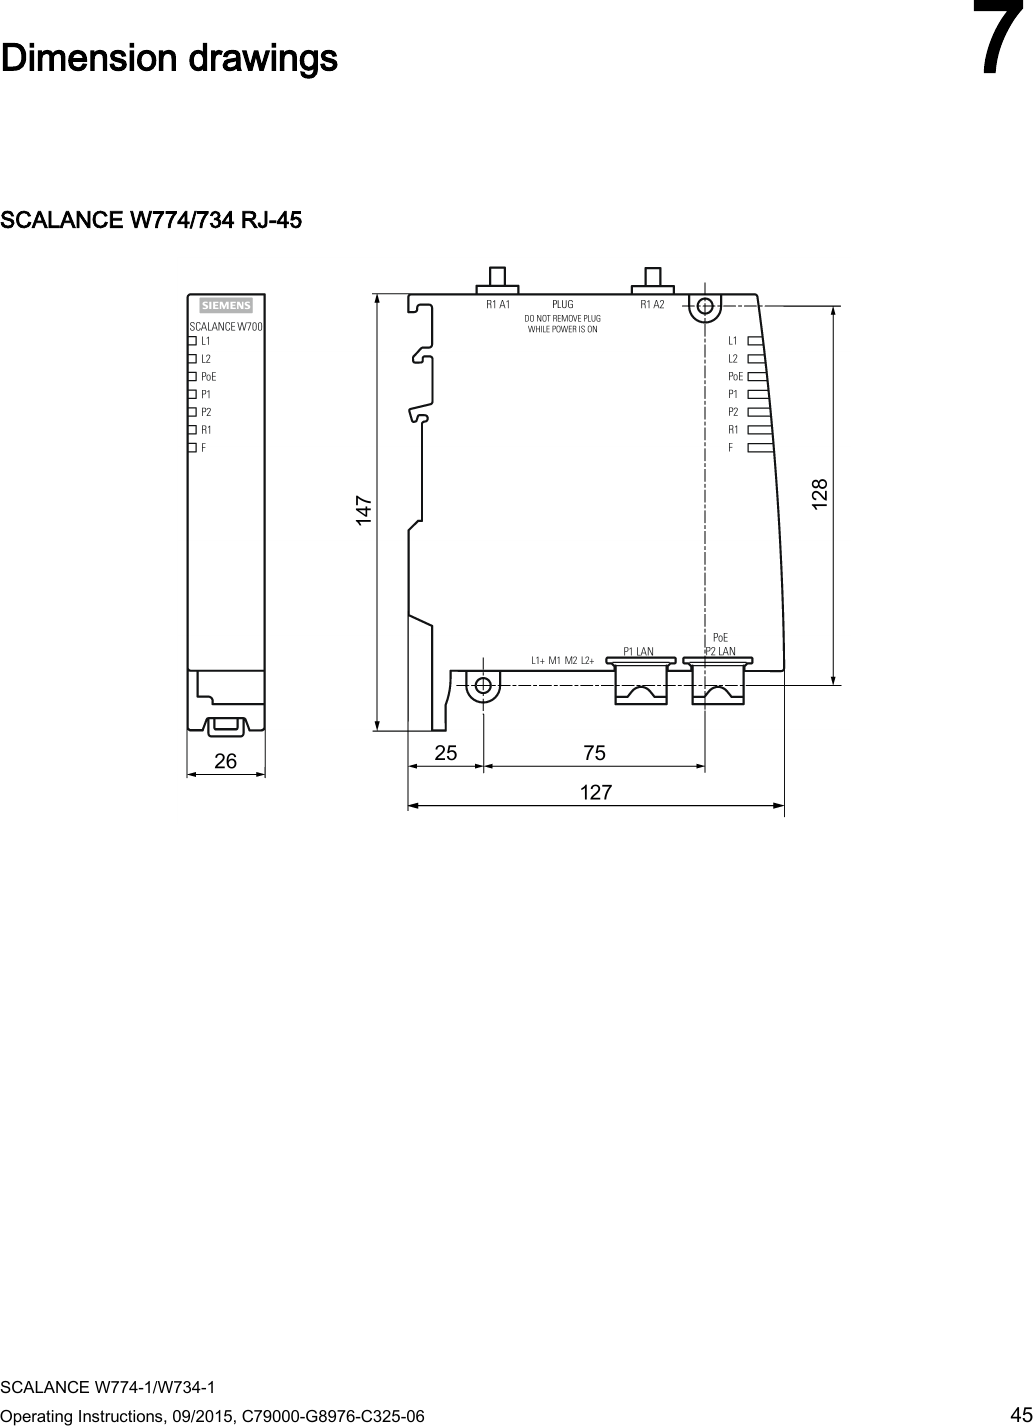  SCALANCE W774-1/W734-1 Operating Instructions, 09/2015, C79000-G8976-C325-06 45  Dimension drawings 7   SCALANCE W774/734 RJ-45  